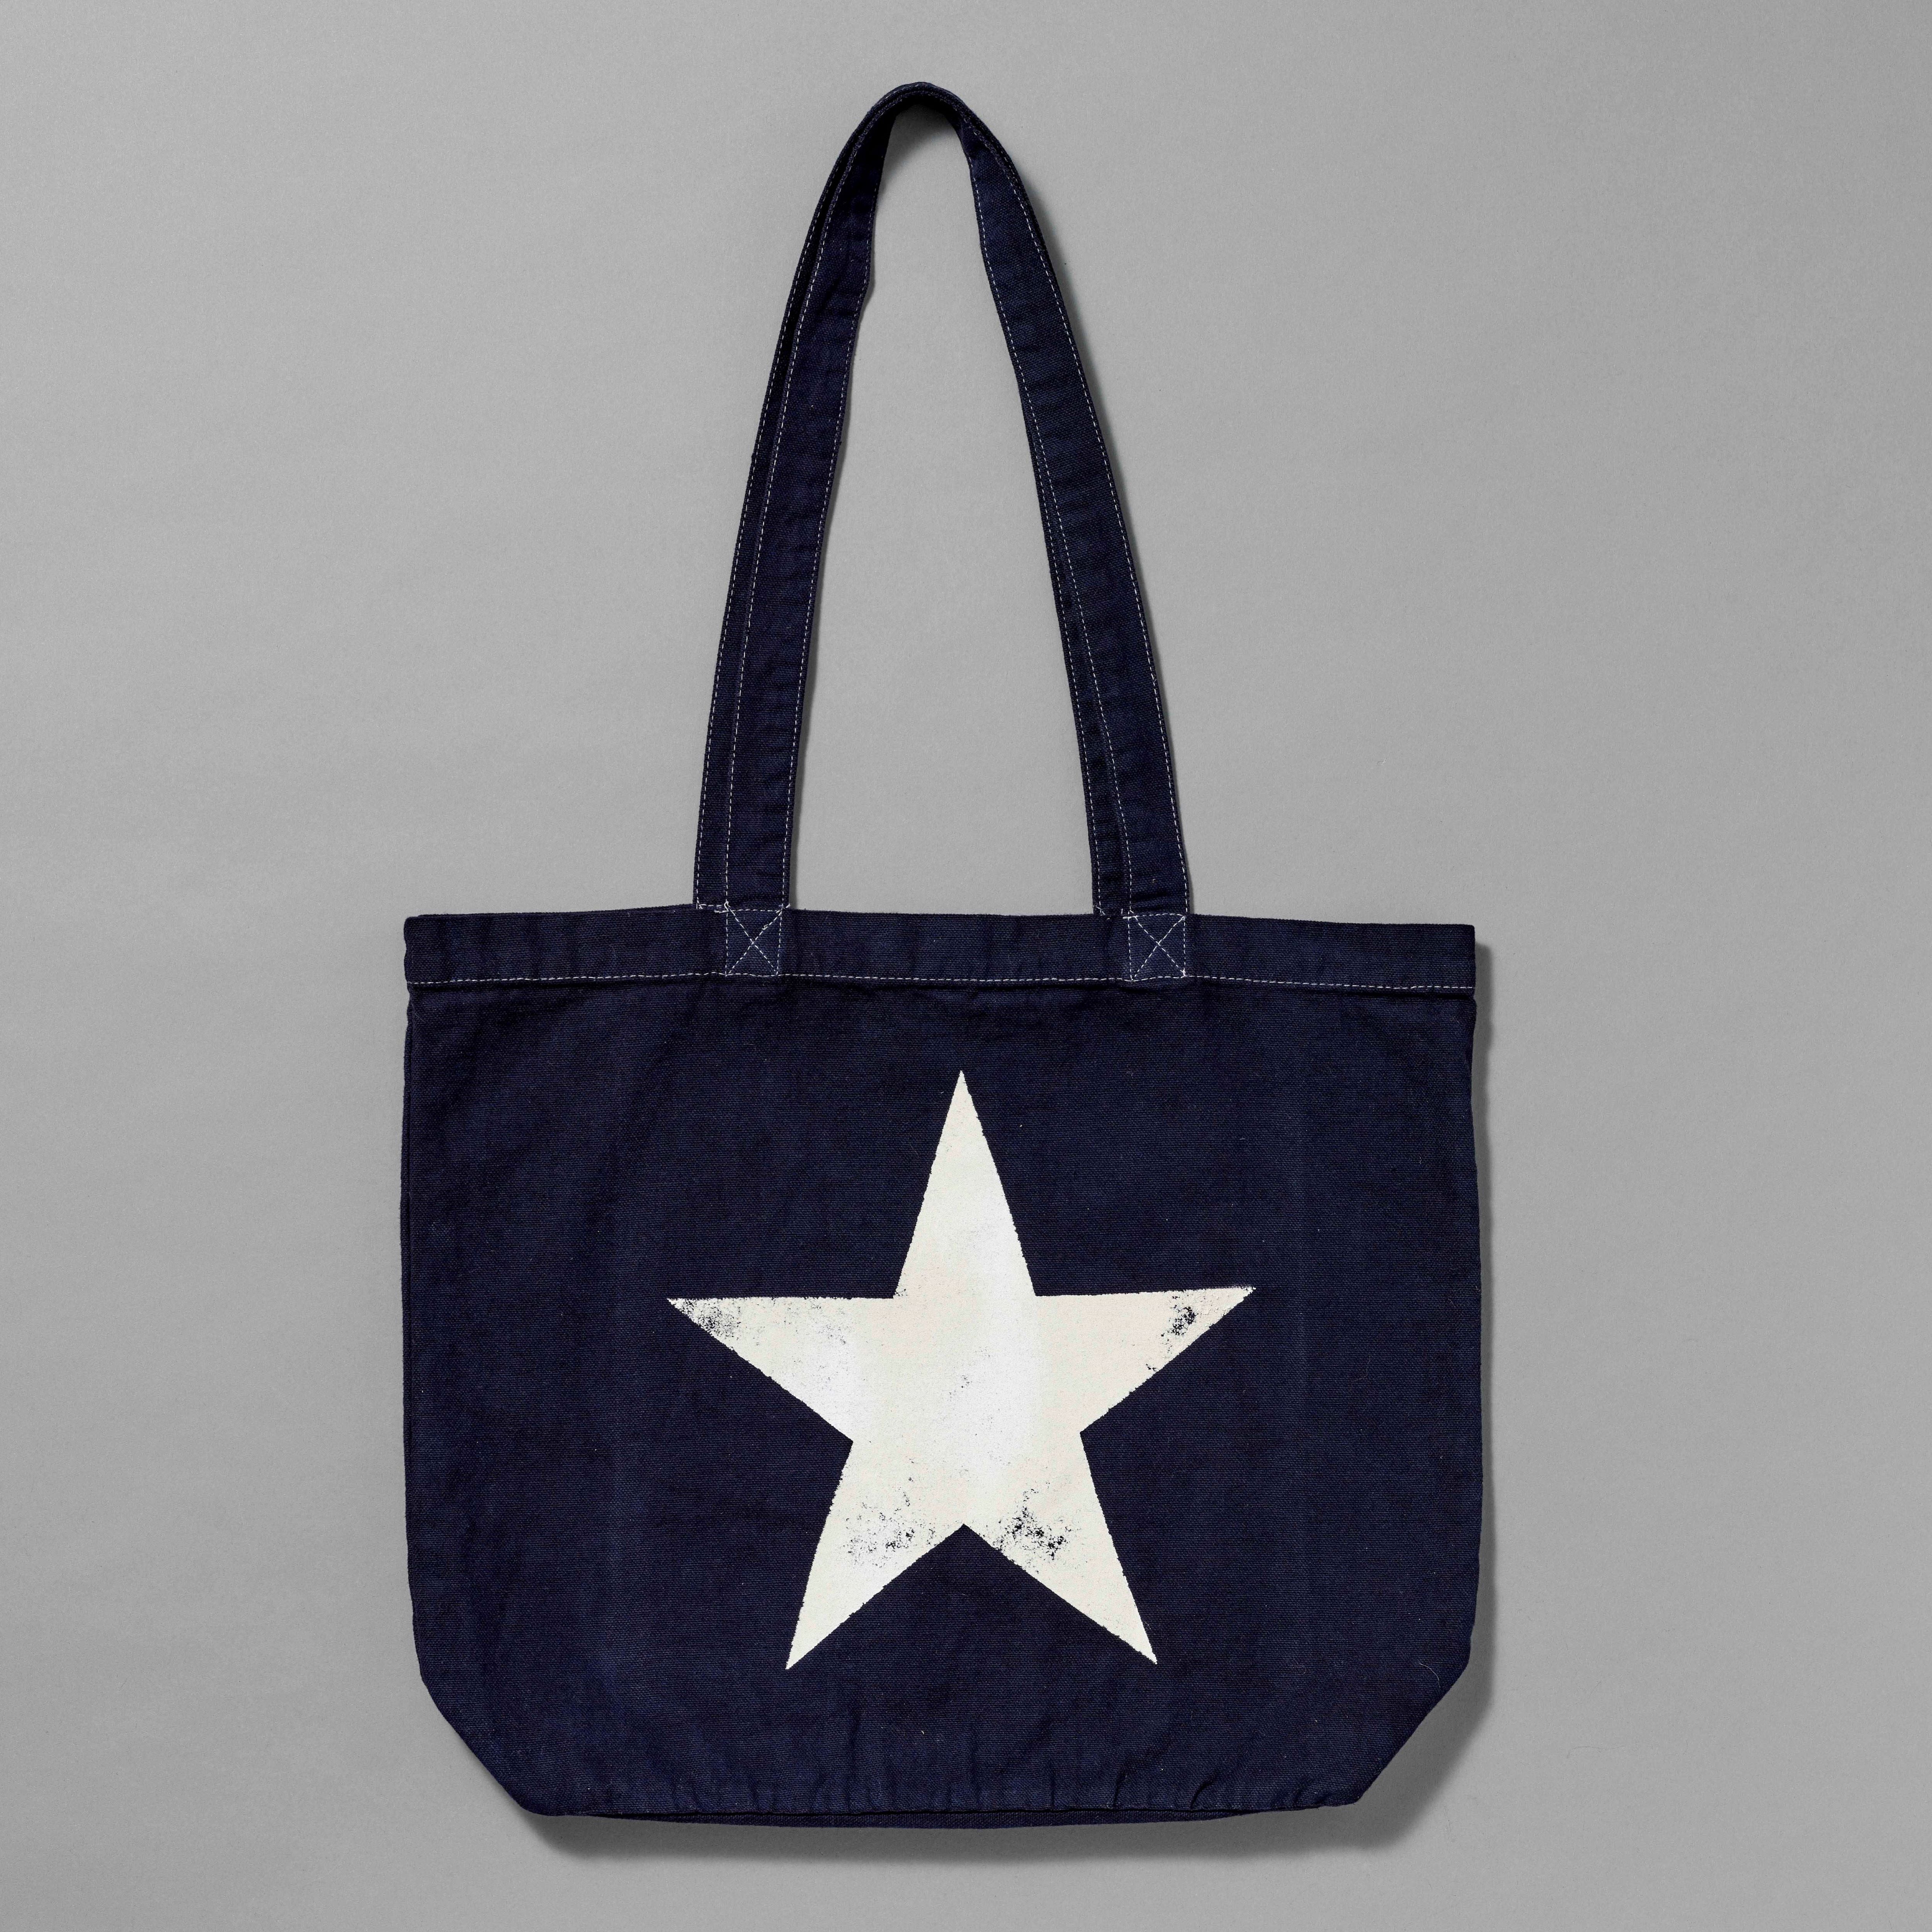 100% Organic Cotton navy tote with a white star printed. Measures 15.5" x 13". 11.5" handles